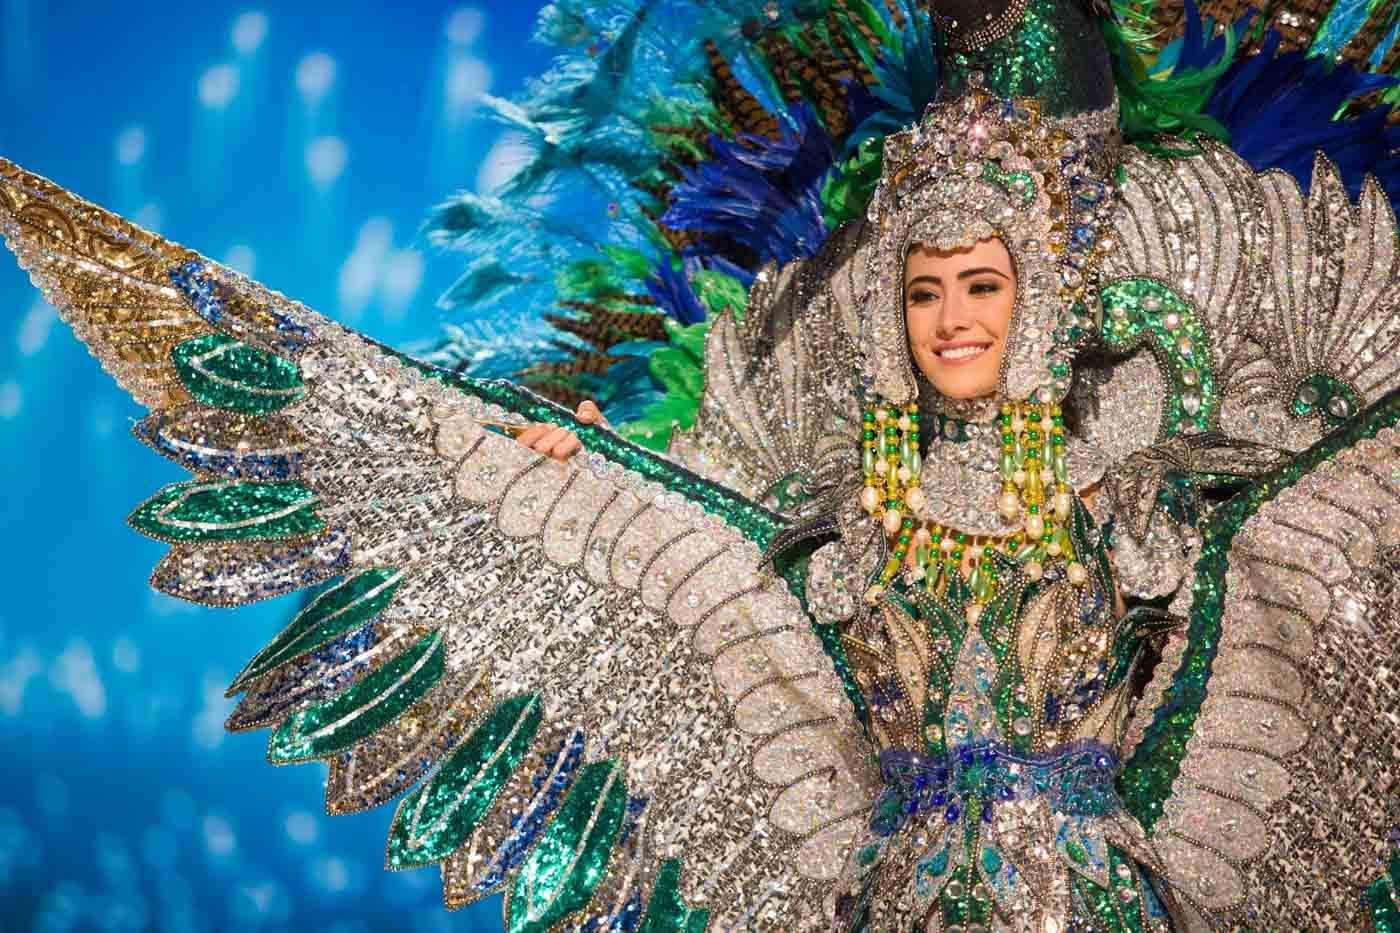 IN PHOTOS: Miss Universe 2016 candidates in their national costumes